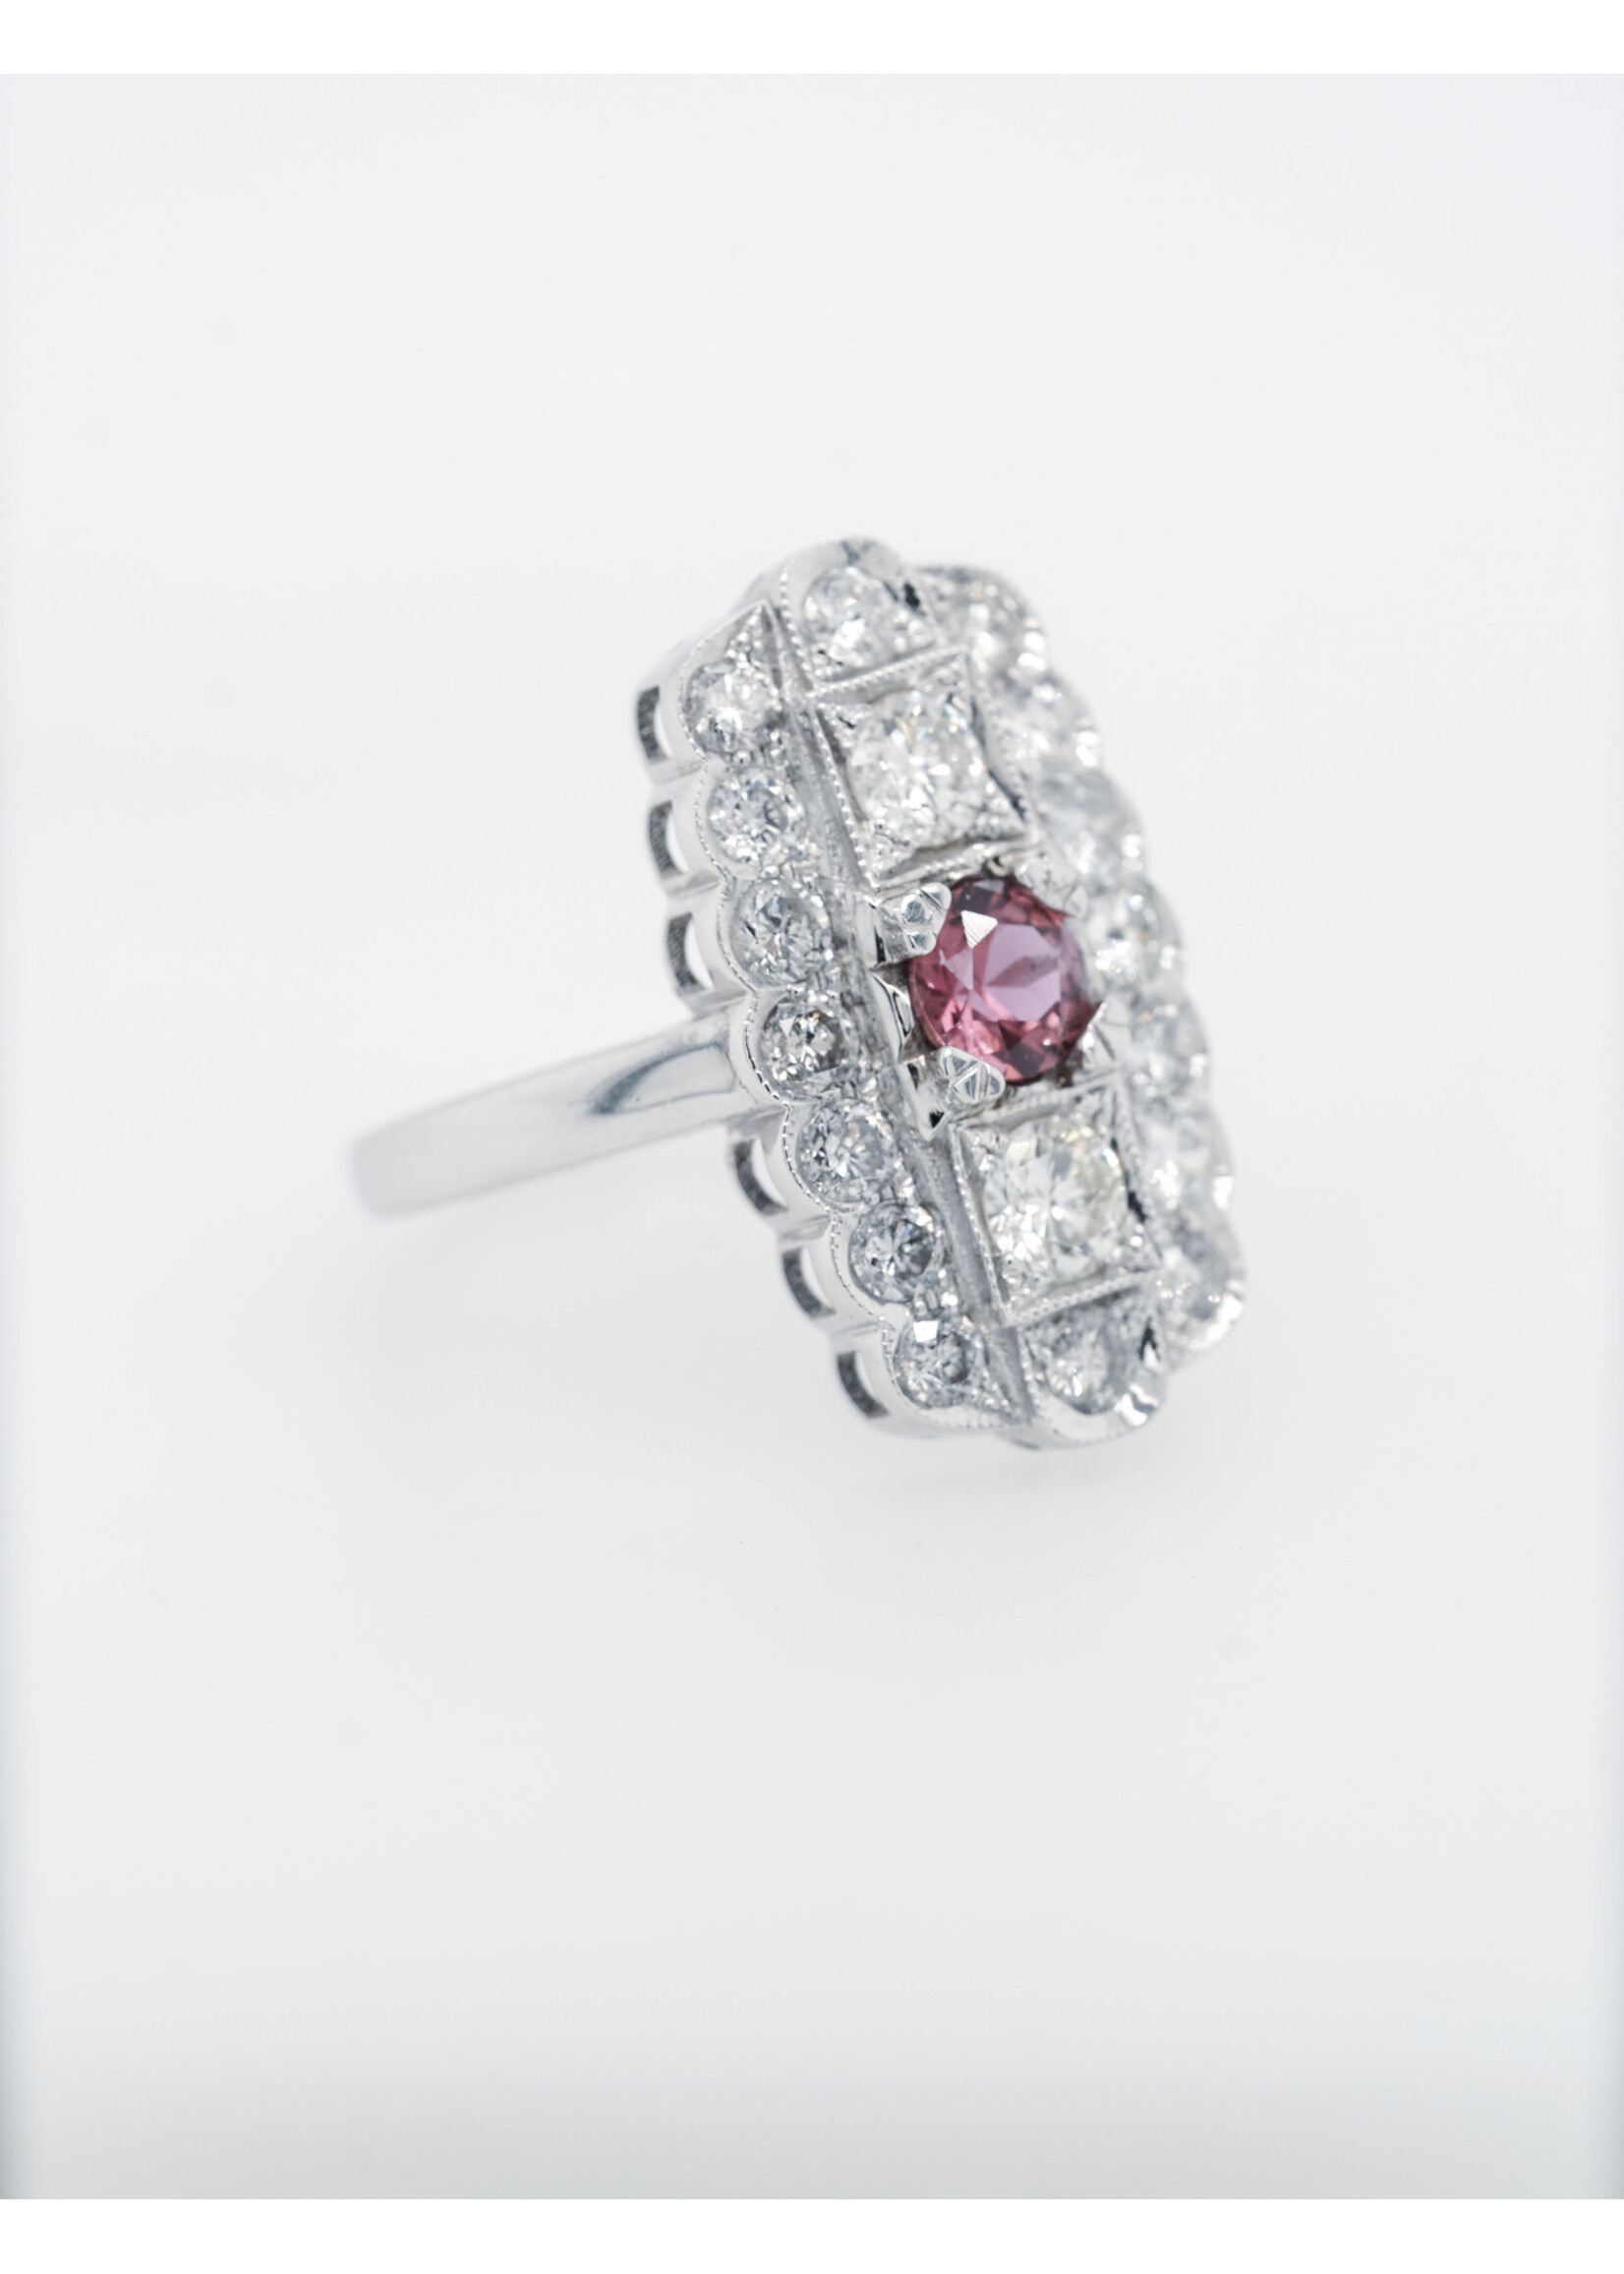 14KW 6.75g 2.80ctw (.60ctr) Pink Sapphire & Diamond Vintage Inspired Ring (size 8)